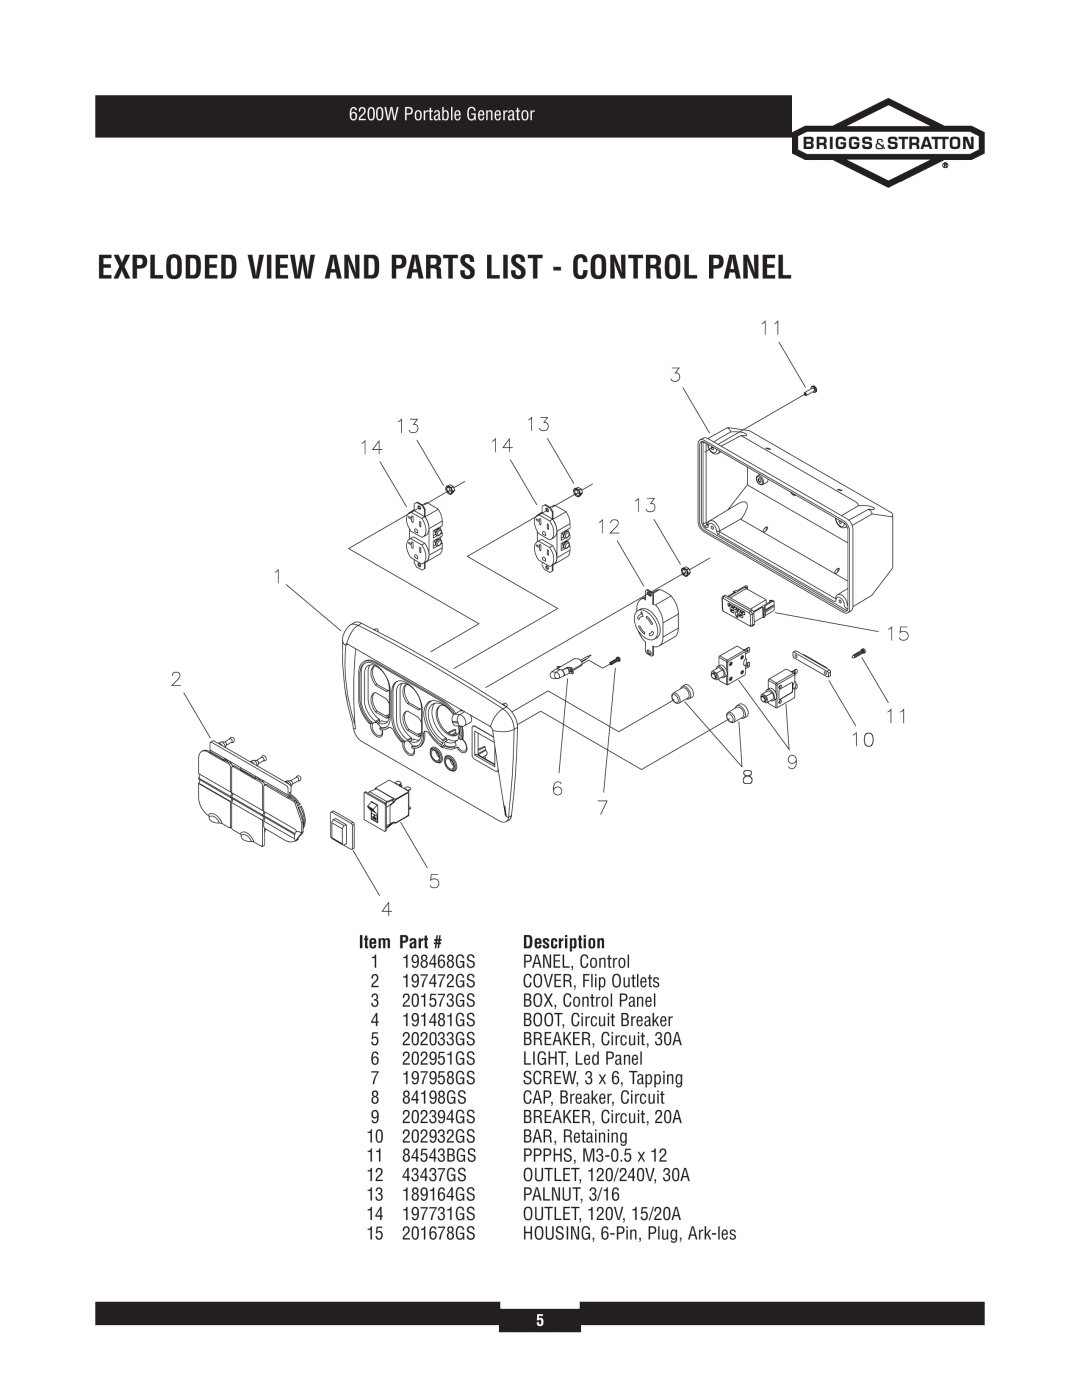 Briggs & Stratton 30358 manual Exploded View And Parts List - Control Panel, 6200W Portable Generator, Description 